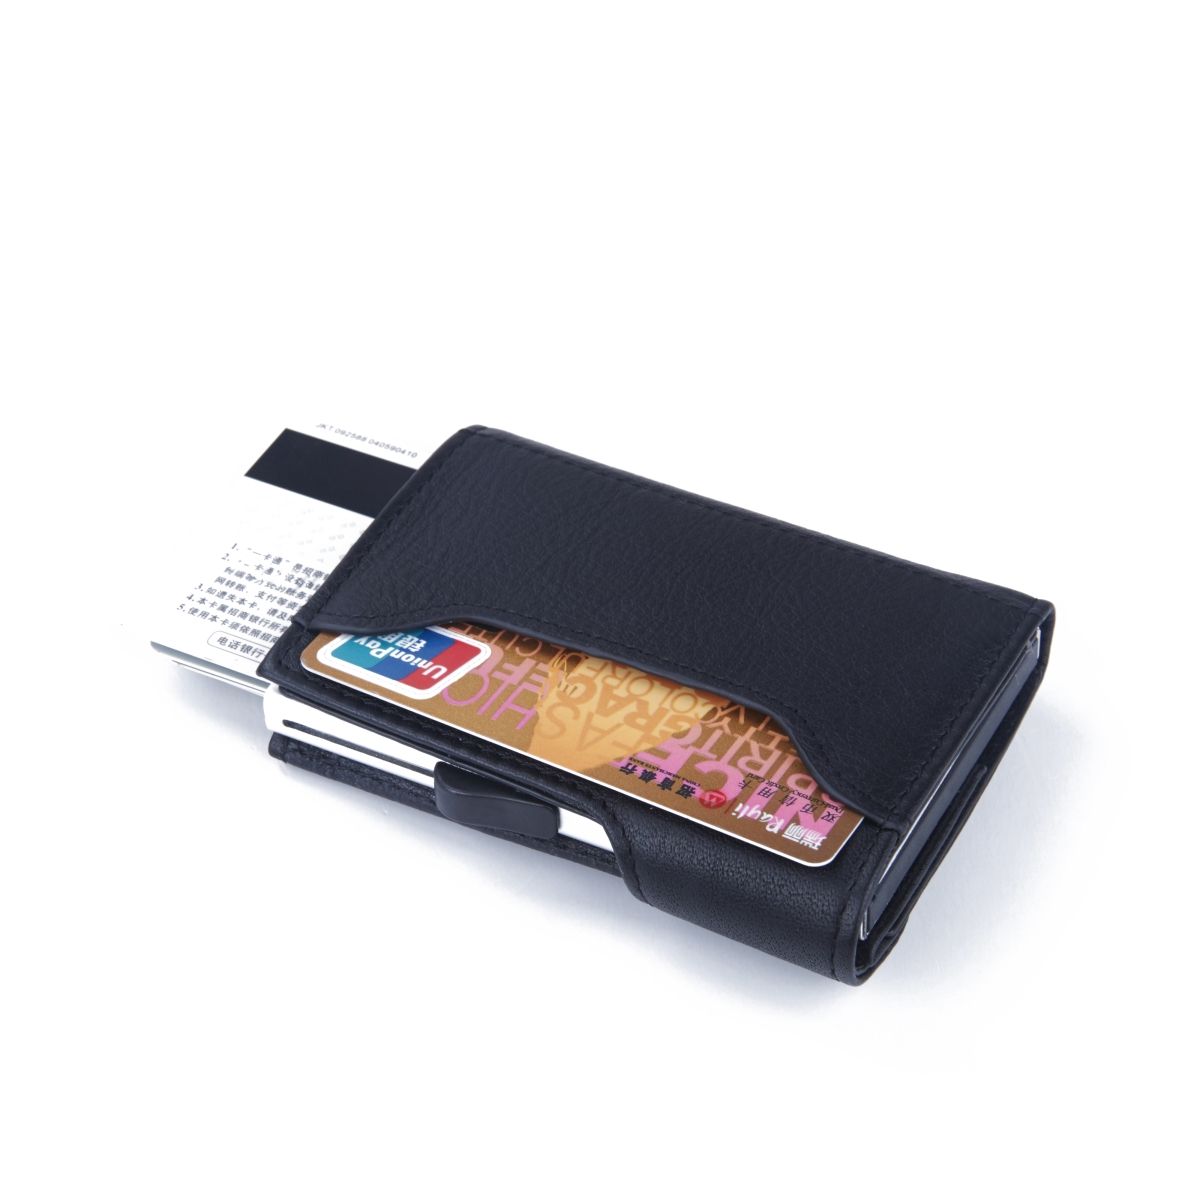 C-Secure Aluminum Card Holder with PU Leather - Black | Wallets Online